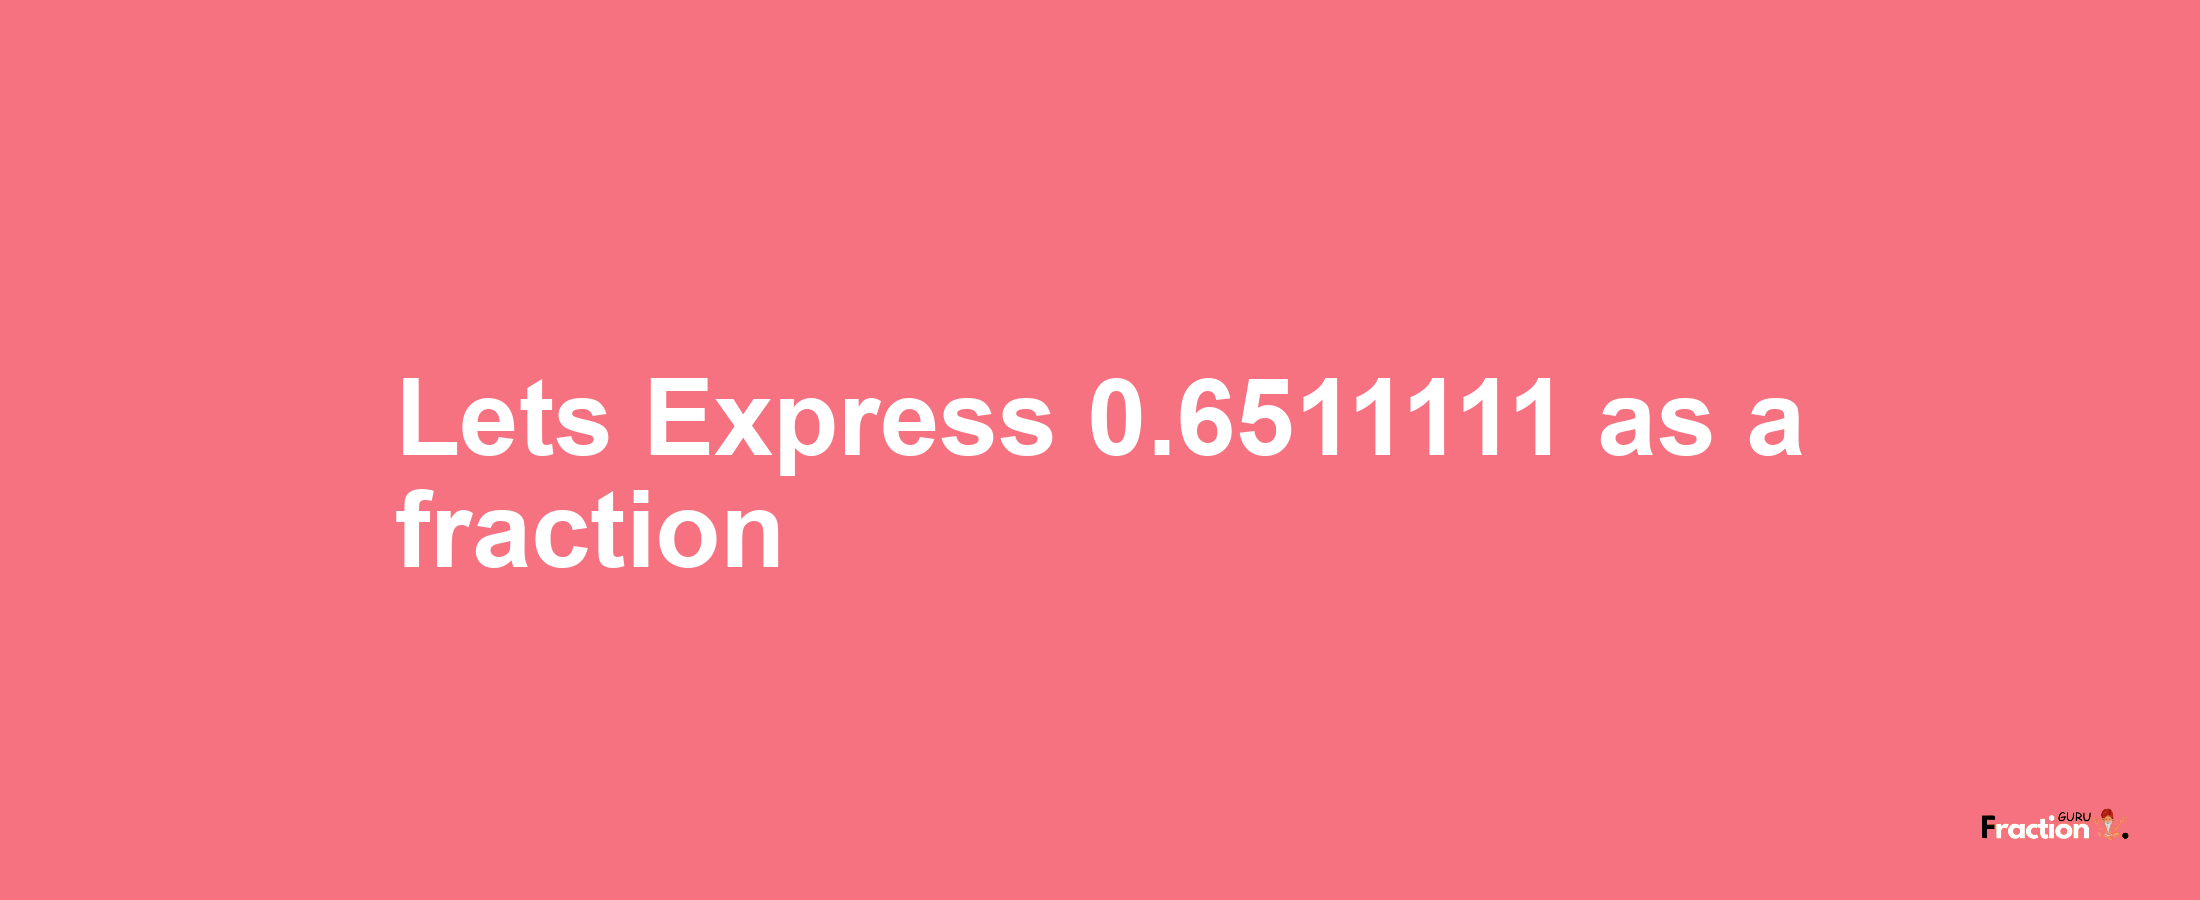 Lets Express 0.6511111 as afraction